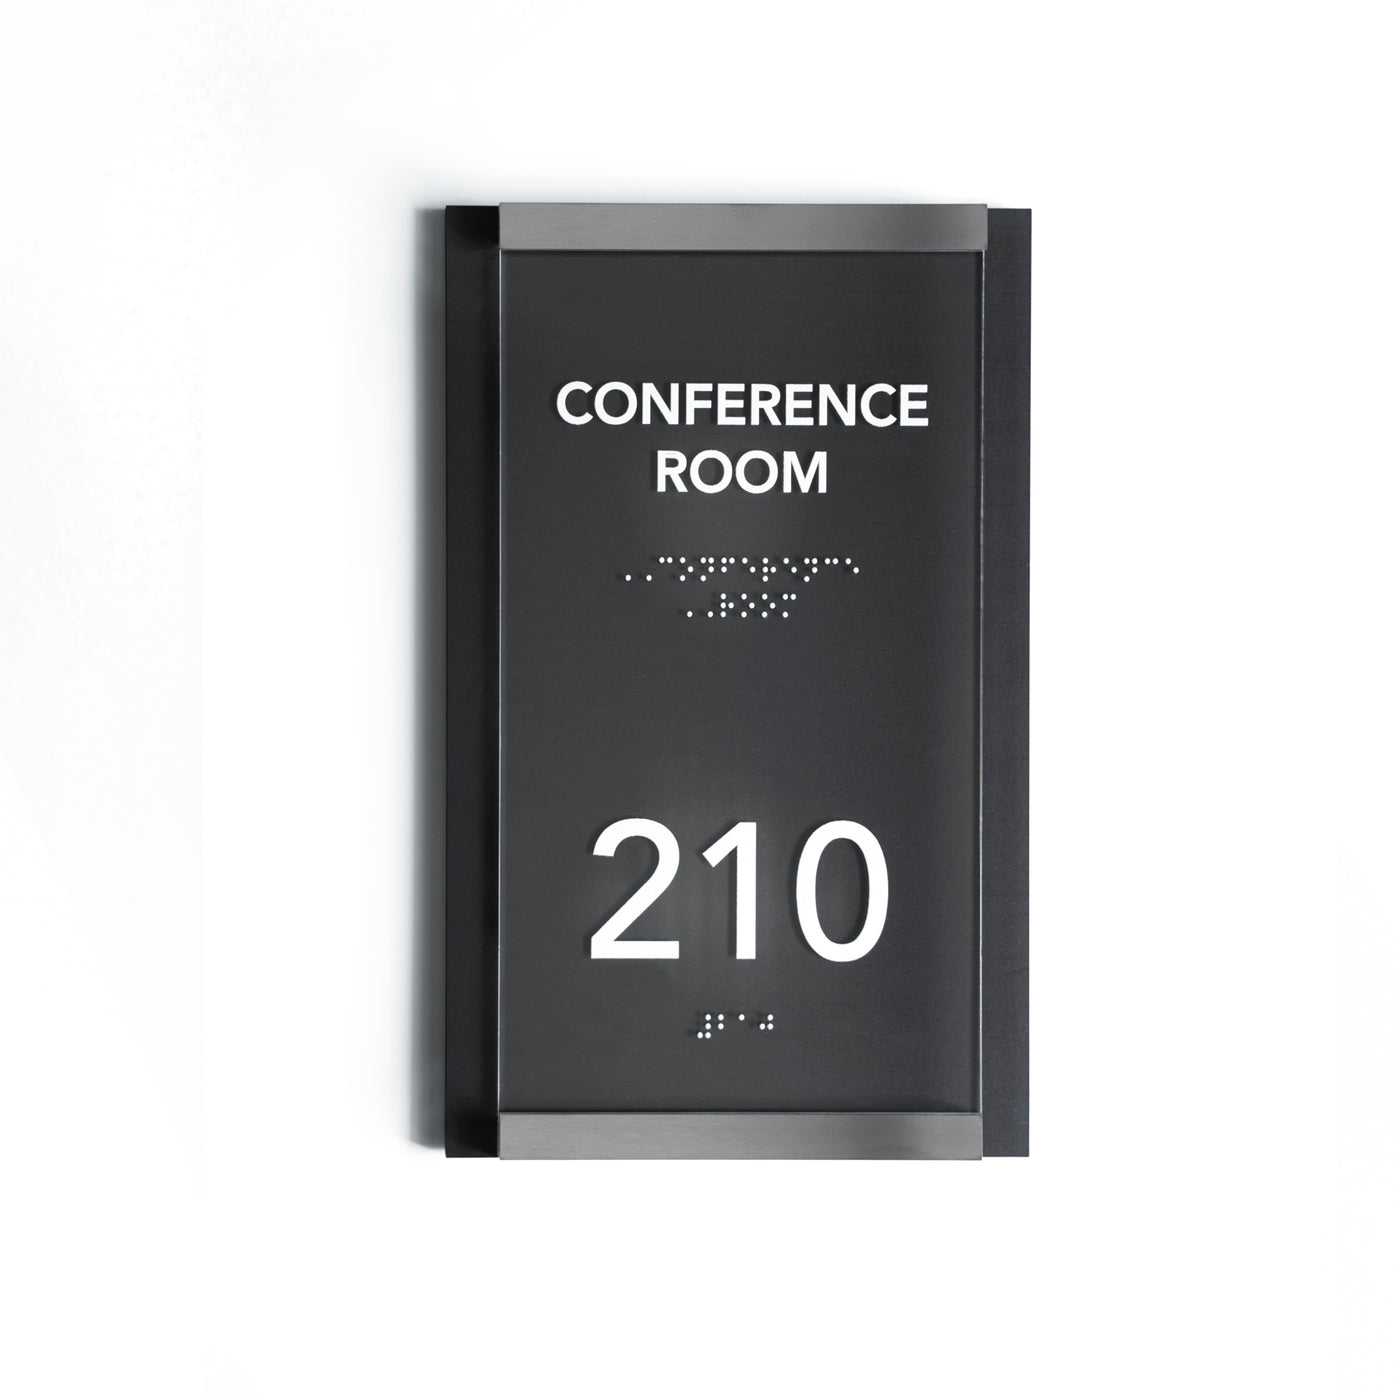 a sign that says conference room on it